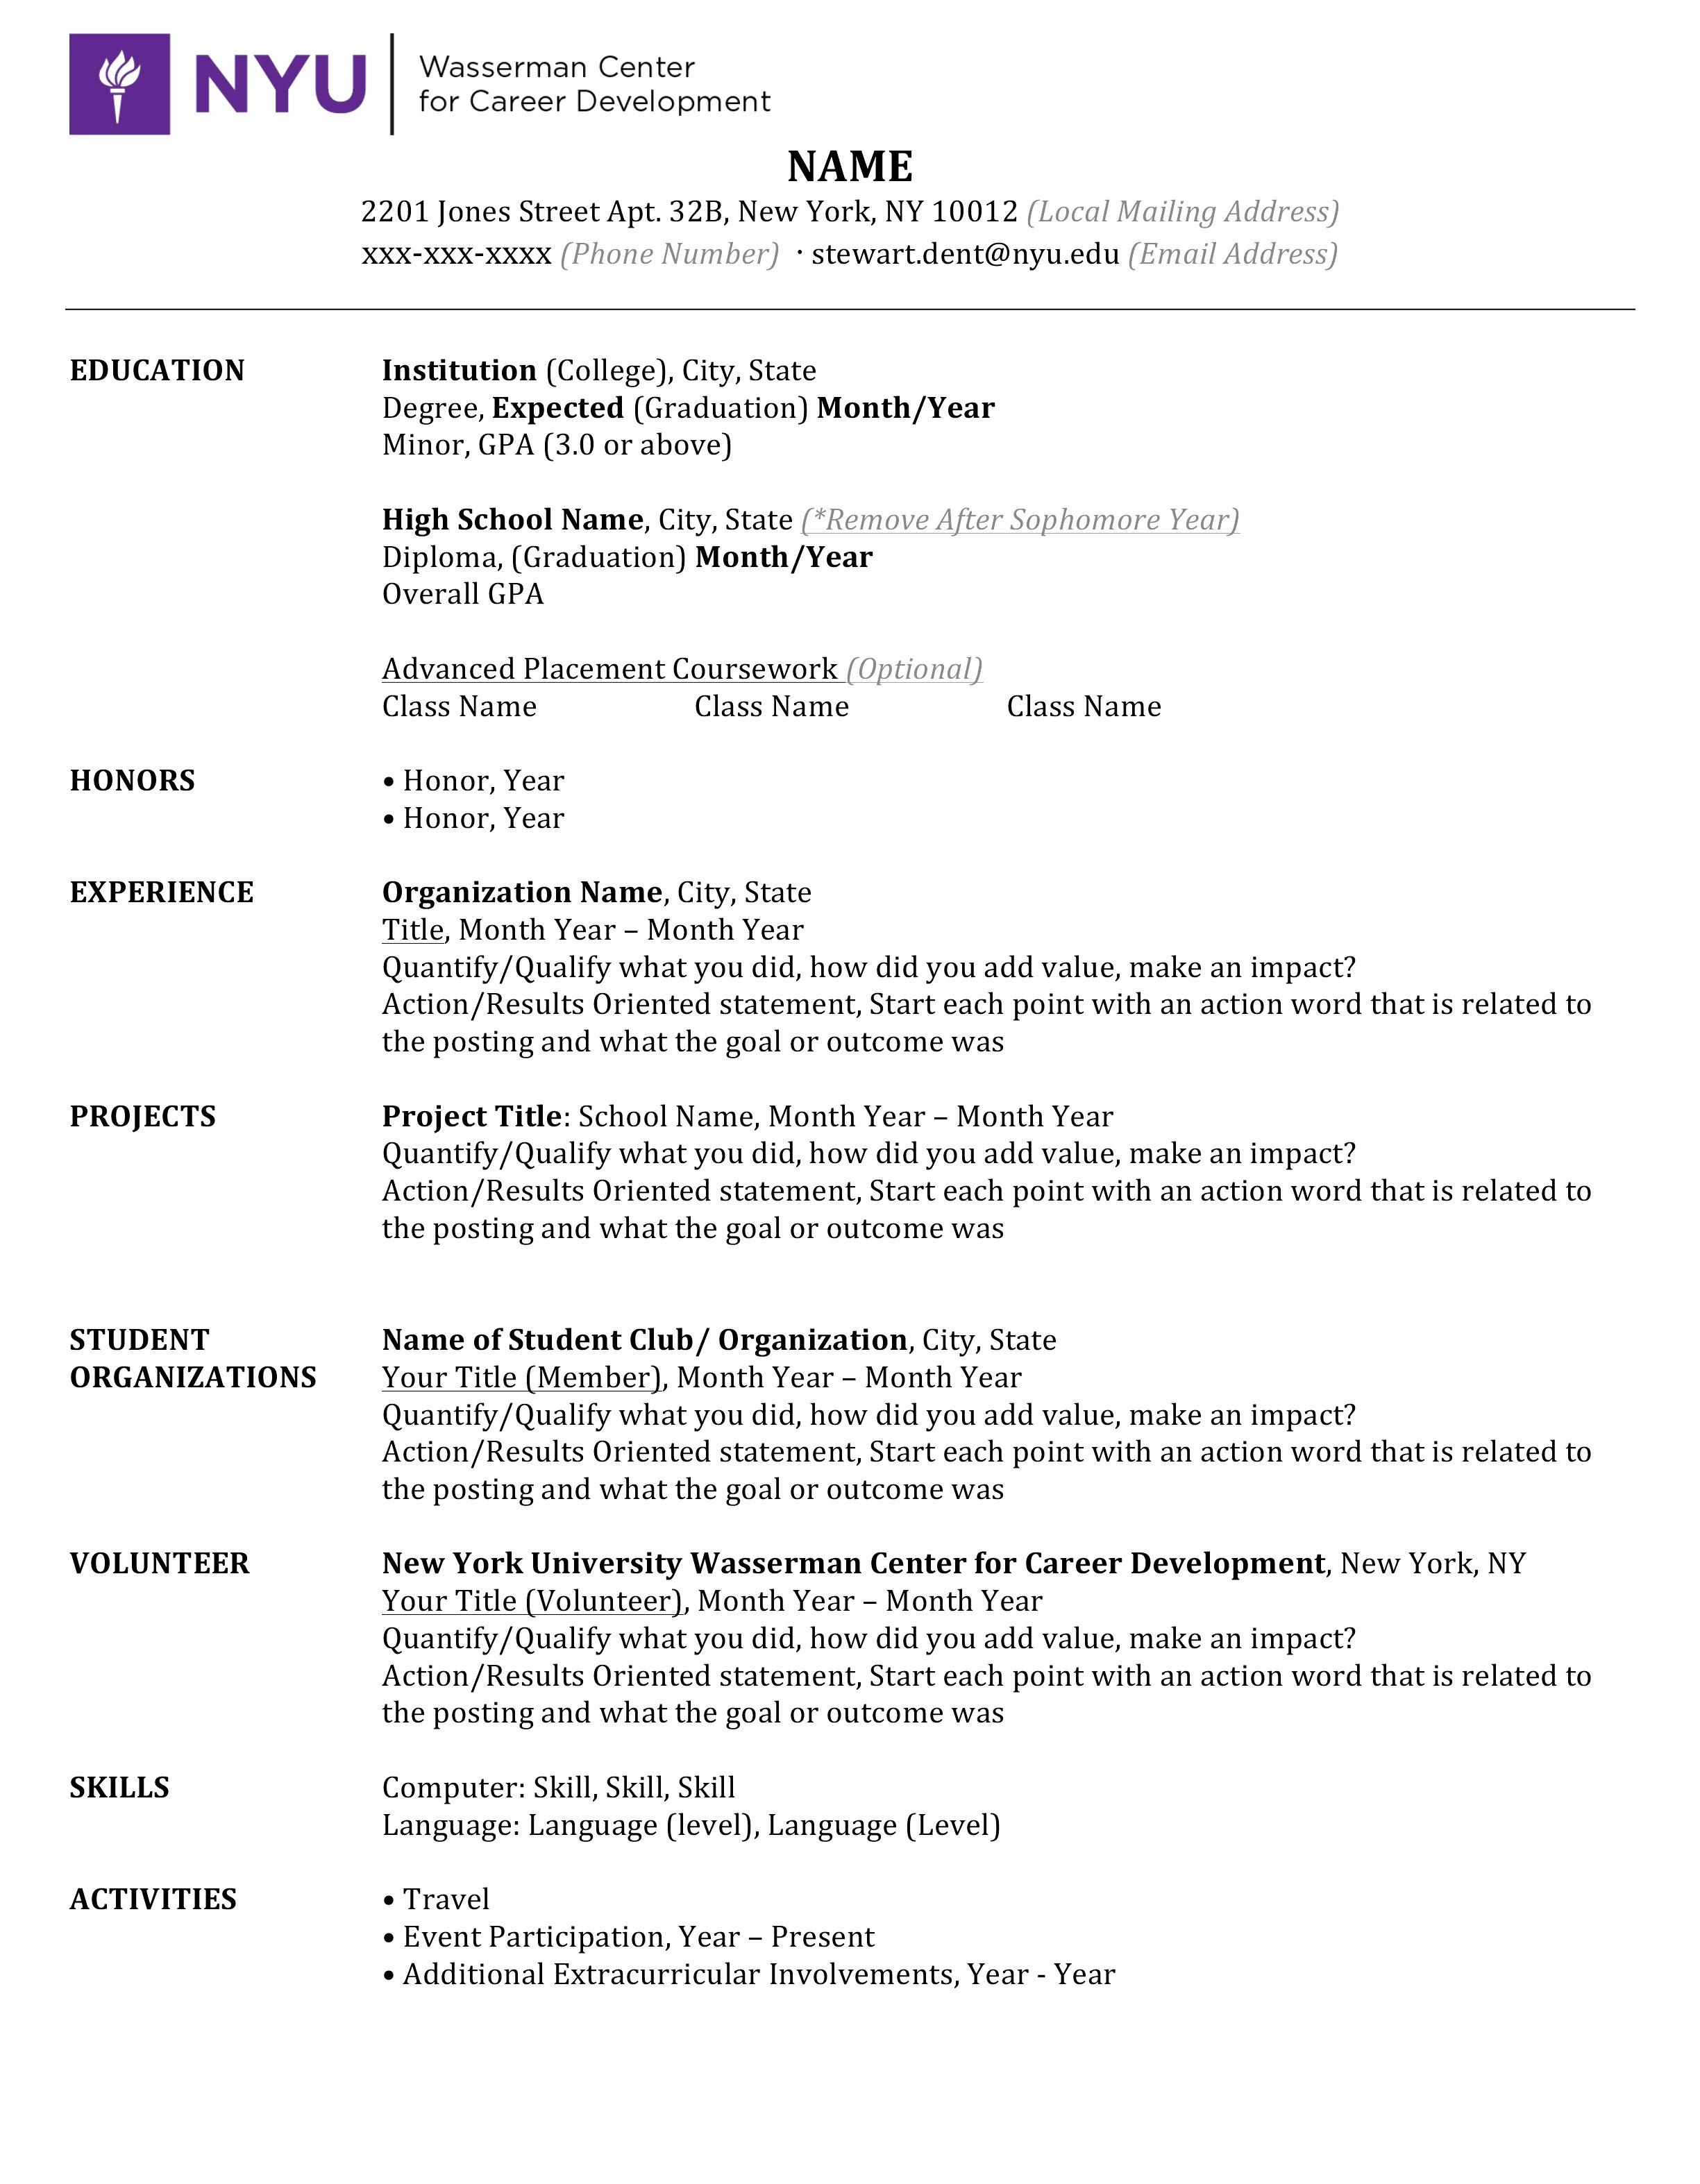 help desk cover letter template Collection-Help Desk Cover Letter Beautiful Help Desk Resume Examples Awesome Hr Resume Examples Unique Od 7-n